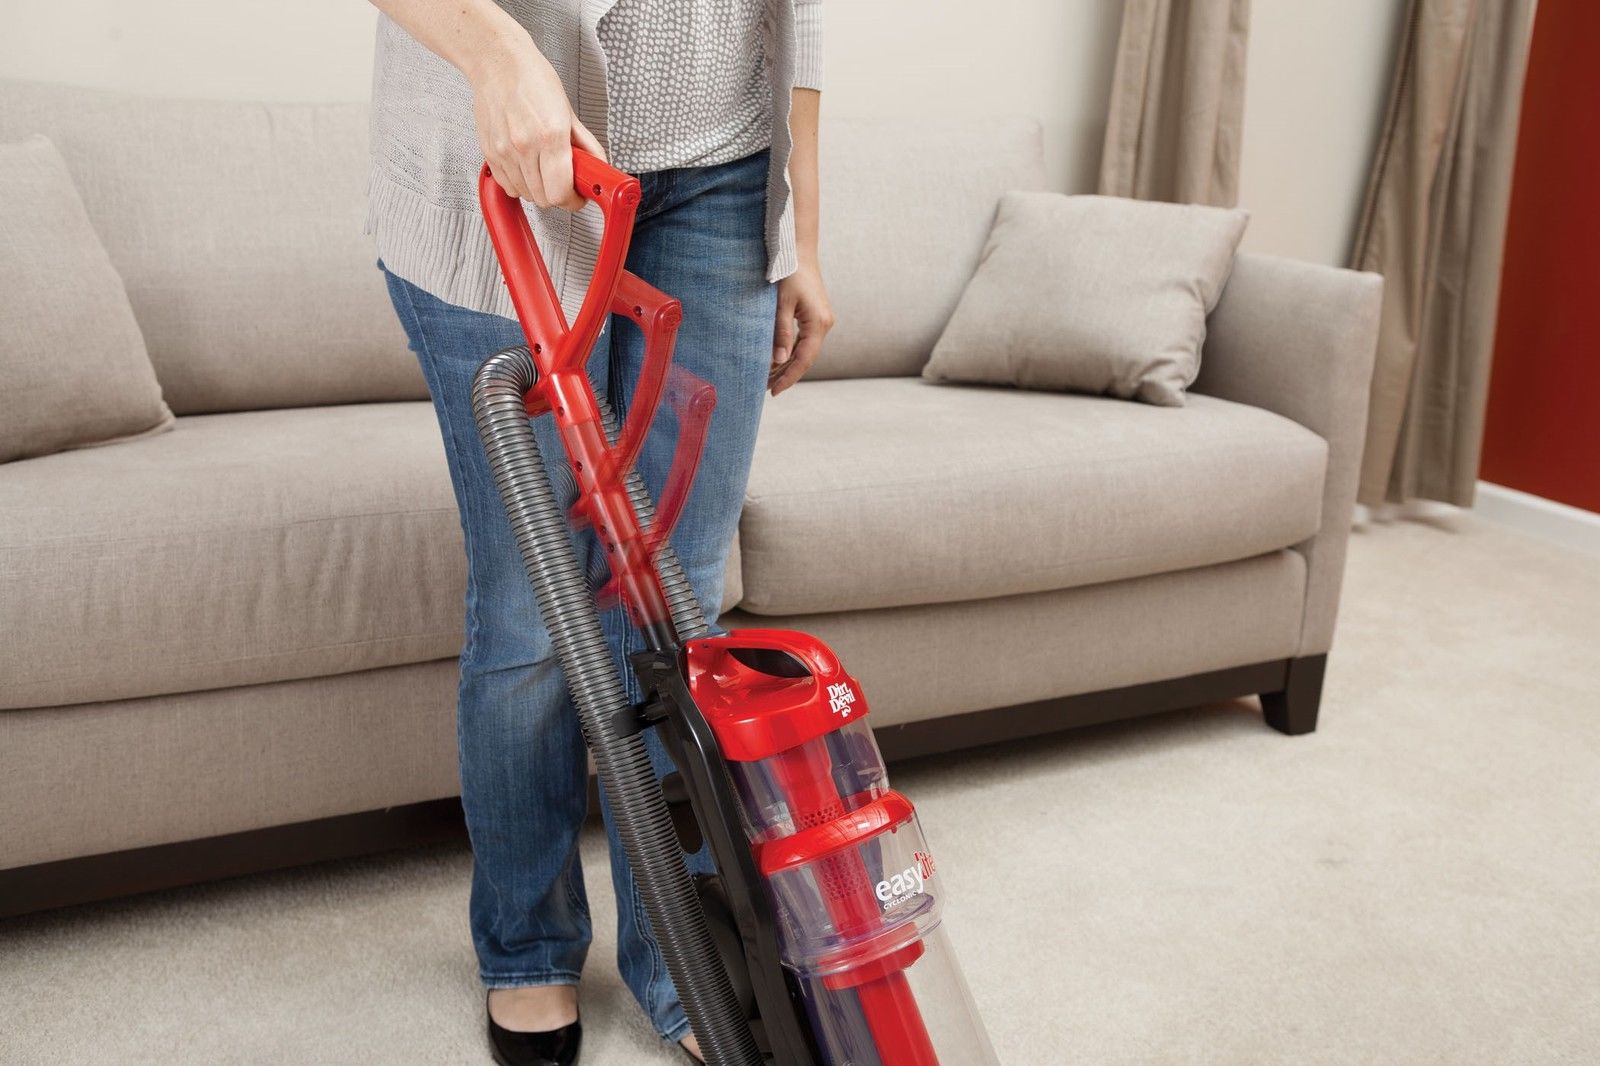 Dirt Devil Extreme Cyclonic Bagless Upright Vacuum Cleaner Only $35.99 After 25% Off eBay Code!